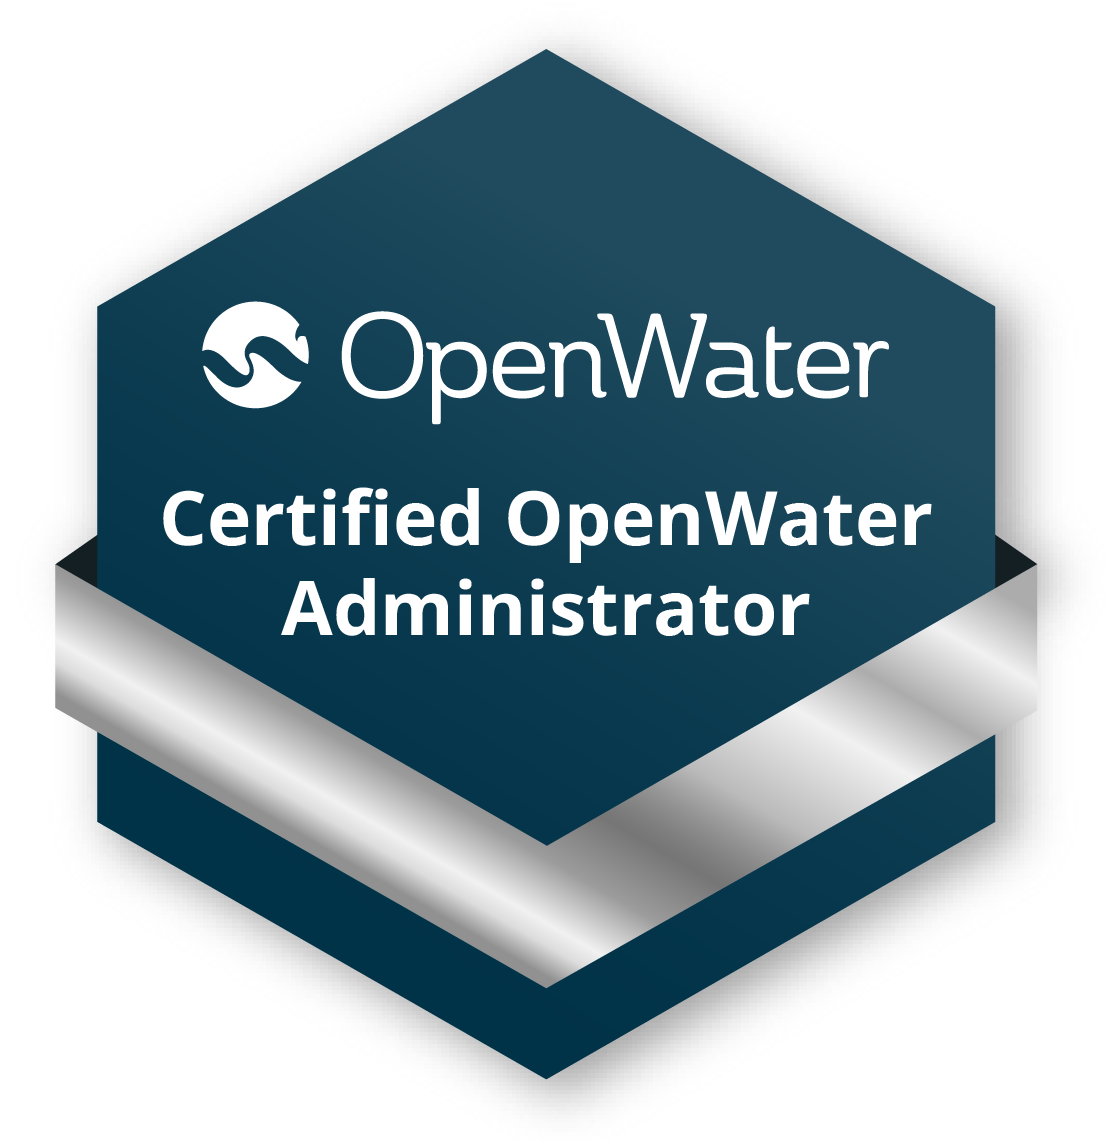 Certified OpenWater Administrator